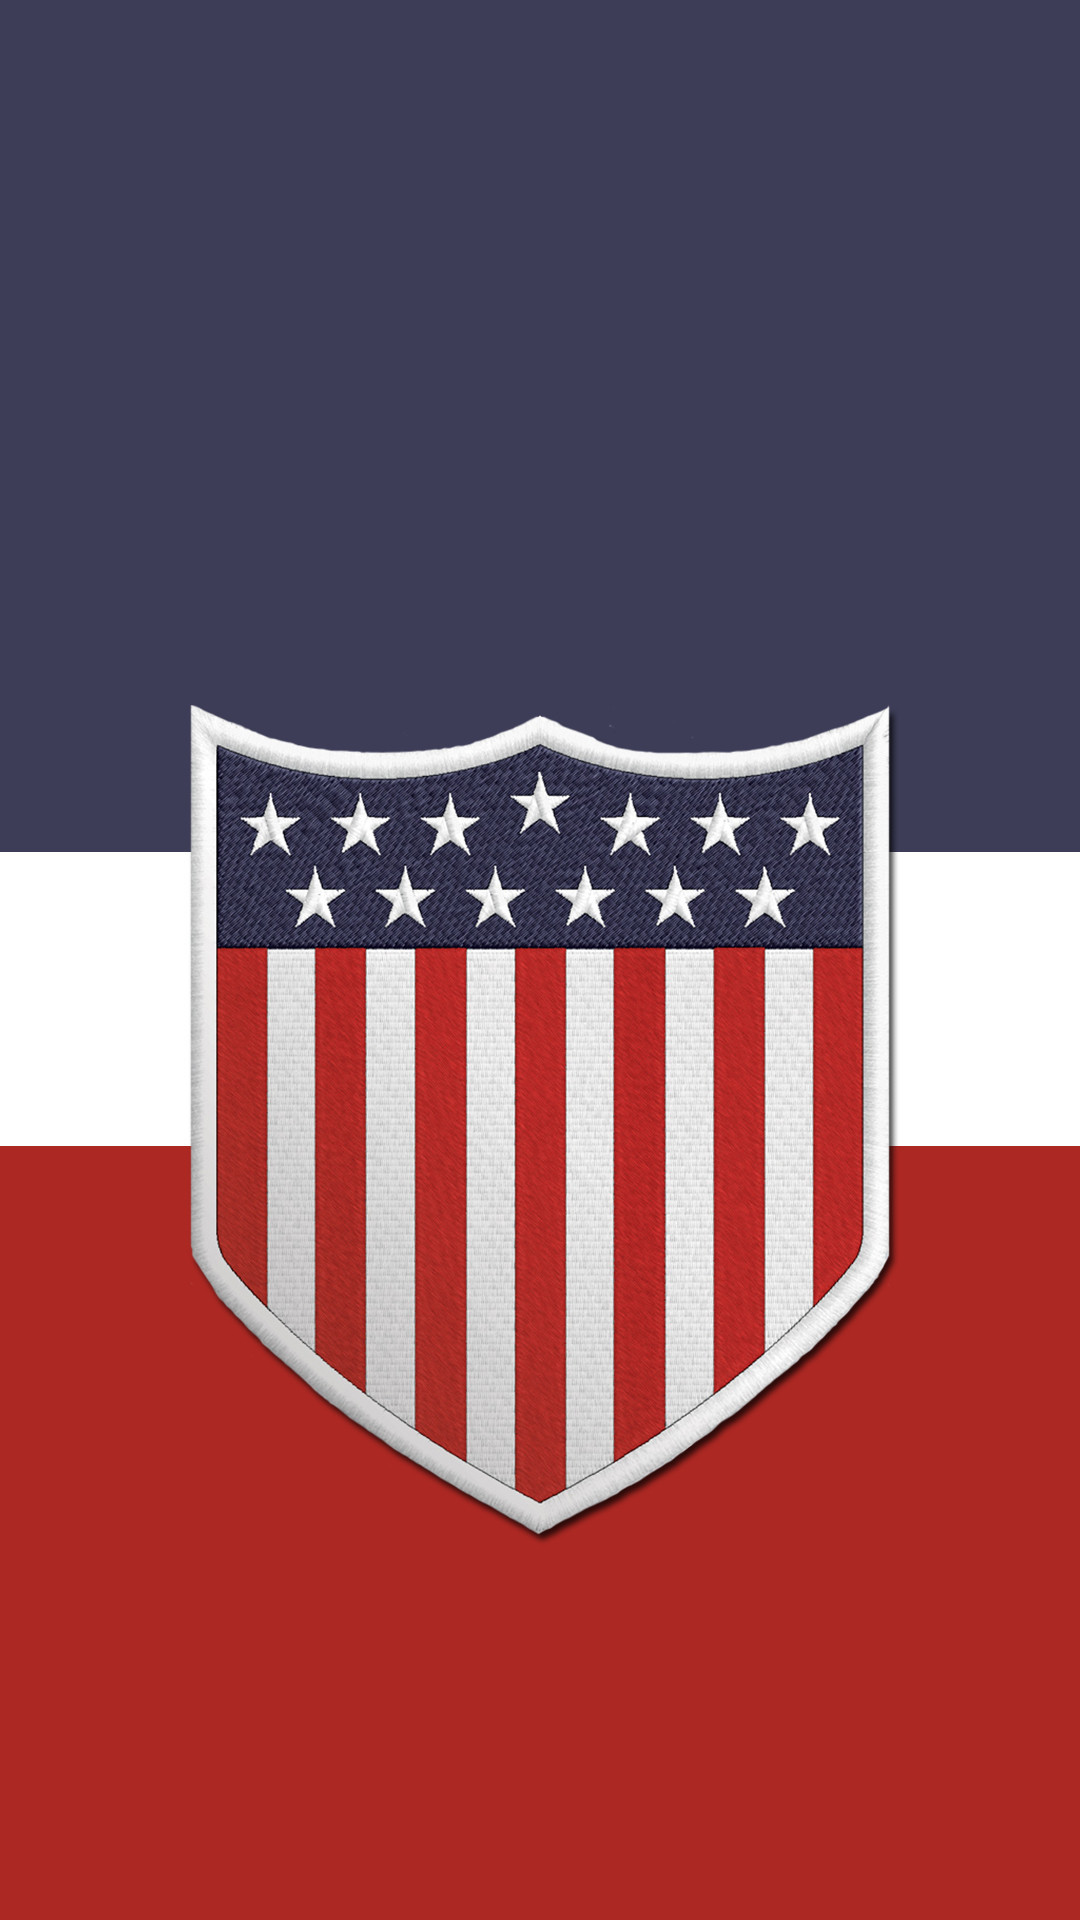 Another Us Soccer Phone Wallpaper - Usa Soccer Wallpaper Iphone , HD Wallpaper & Backgrounds